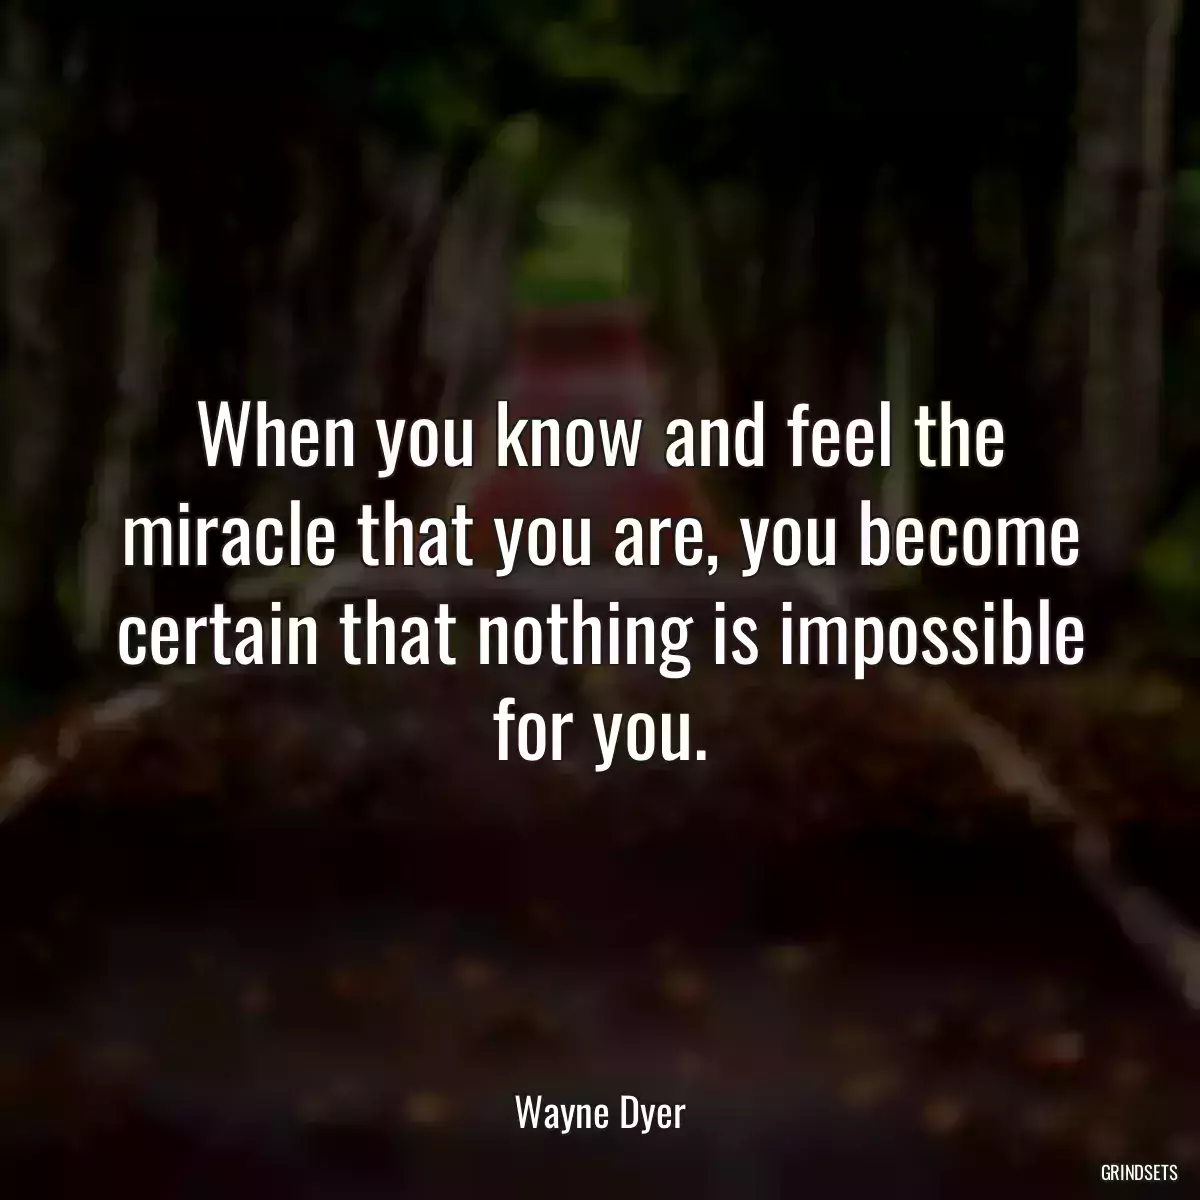 When you know and feel the miracle that you are, you become certain that nothing is impossible for you.